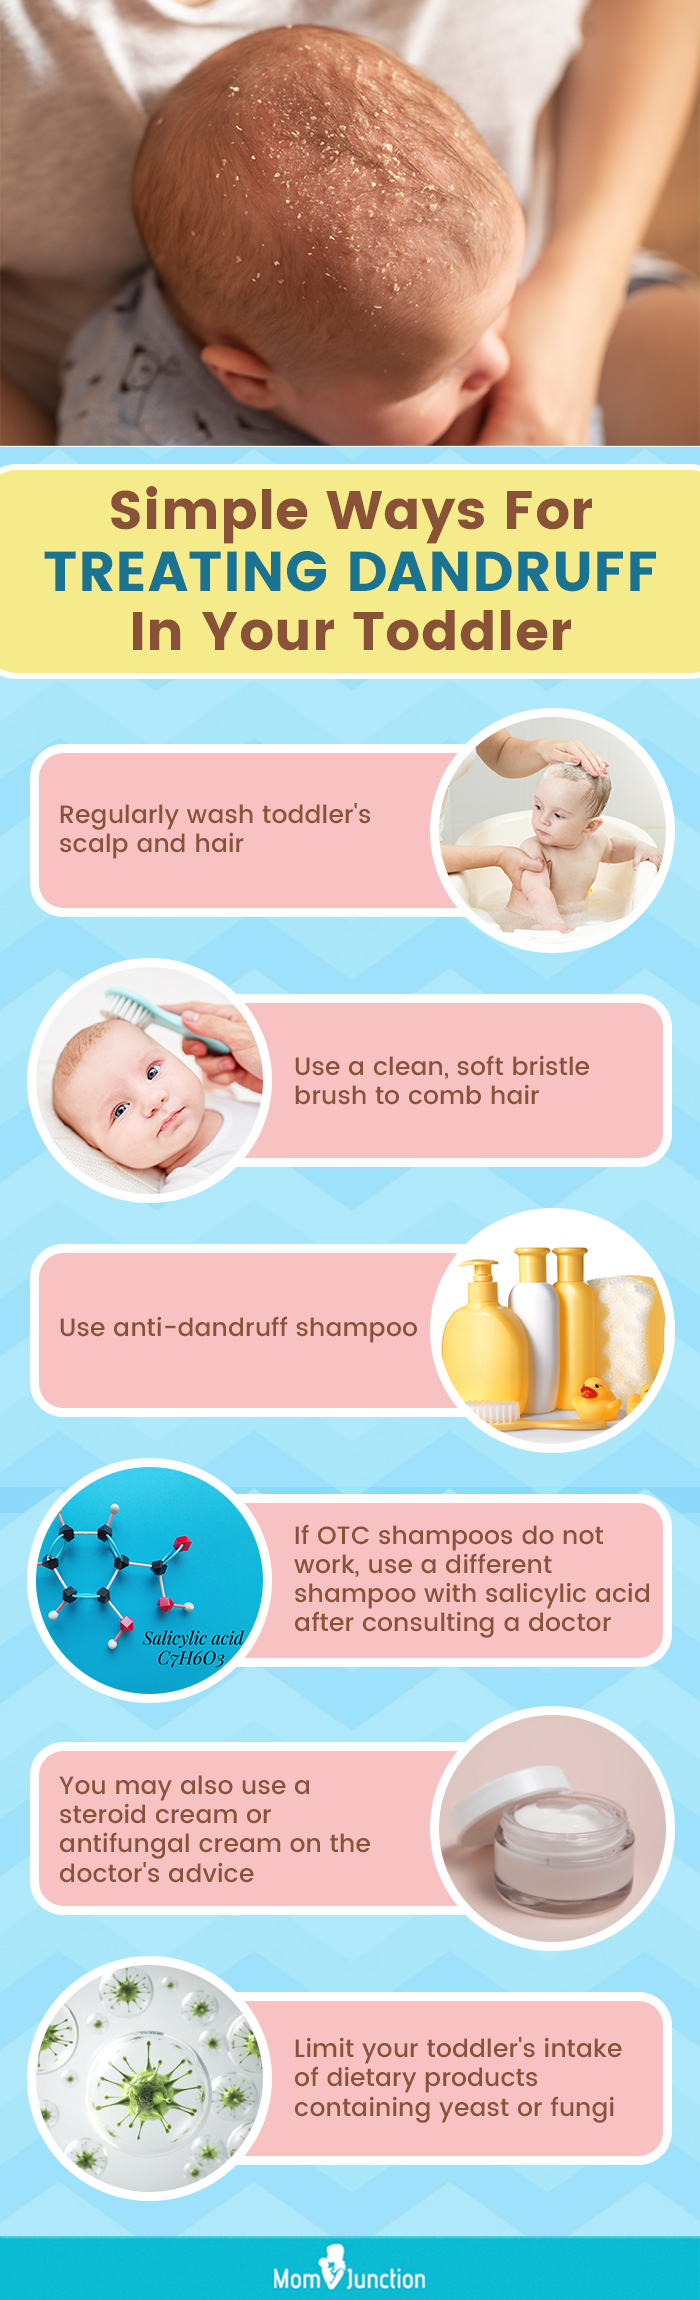 simple ways for treating dandruff in your toddler (infographic)